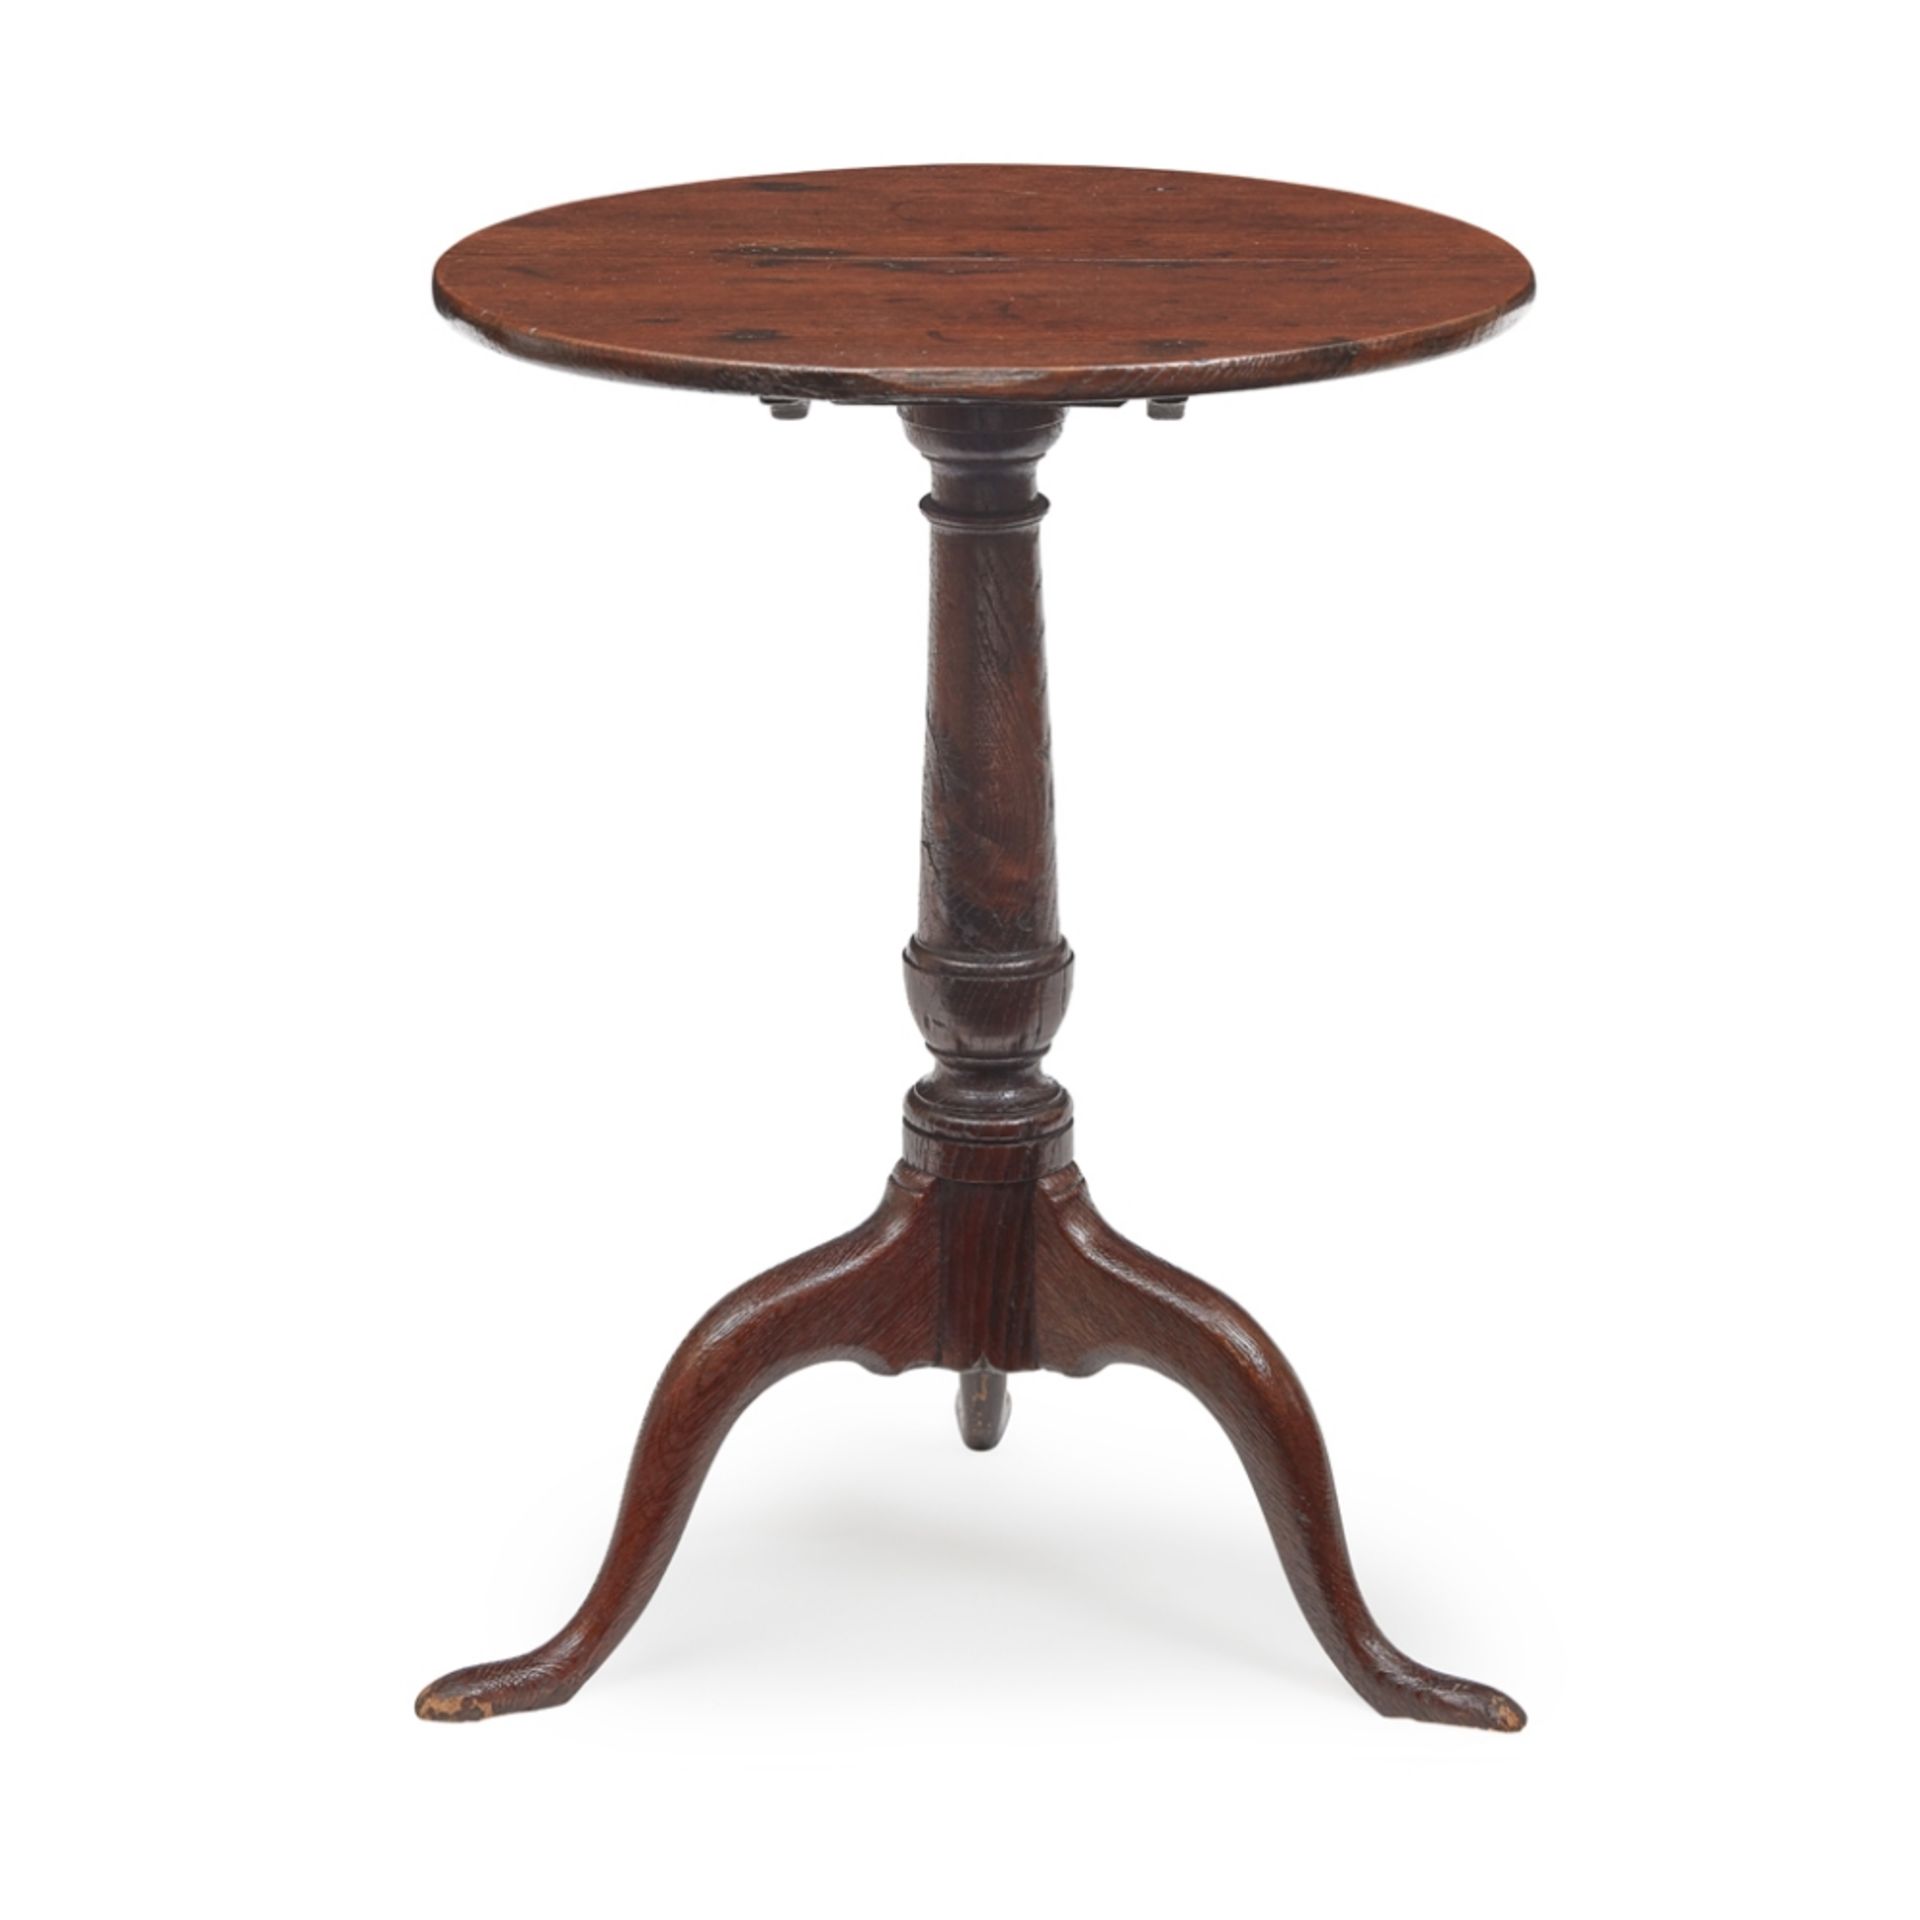 GEORGE III OAK TILT-TOP OCCASIONAL TABLE 18TH CENTURY with a plain circular top raised on a - Image 2 of 2